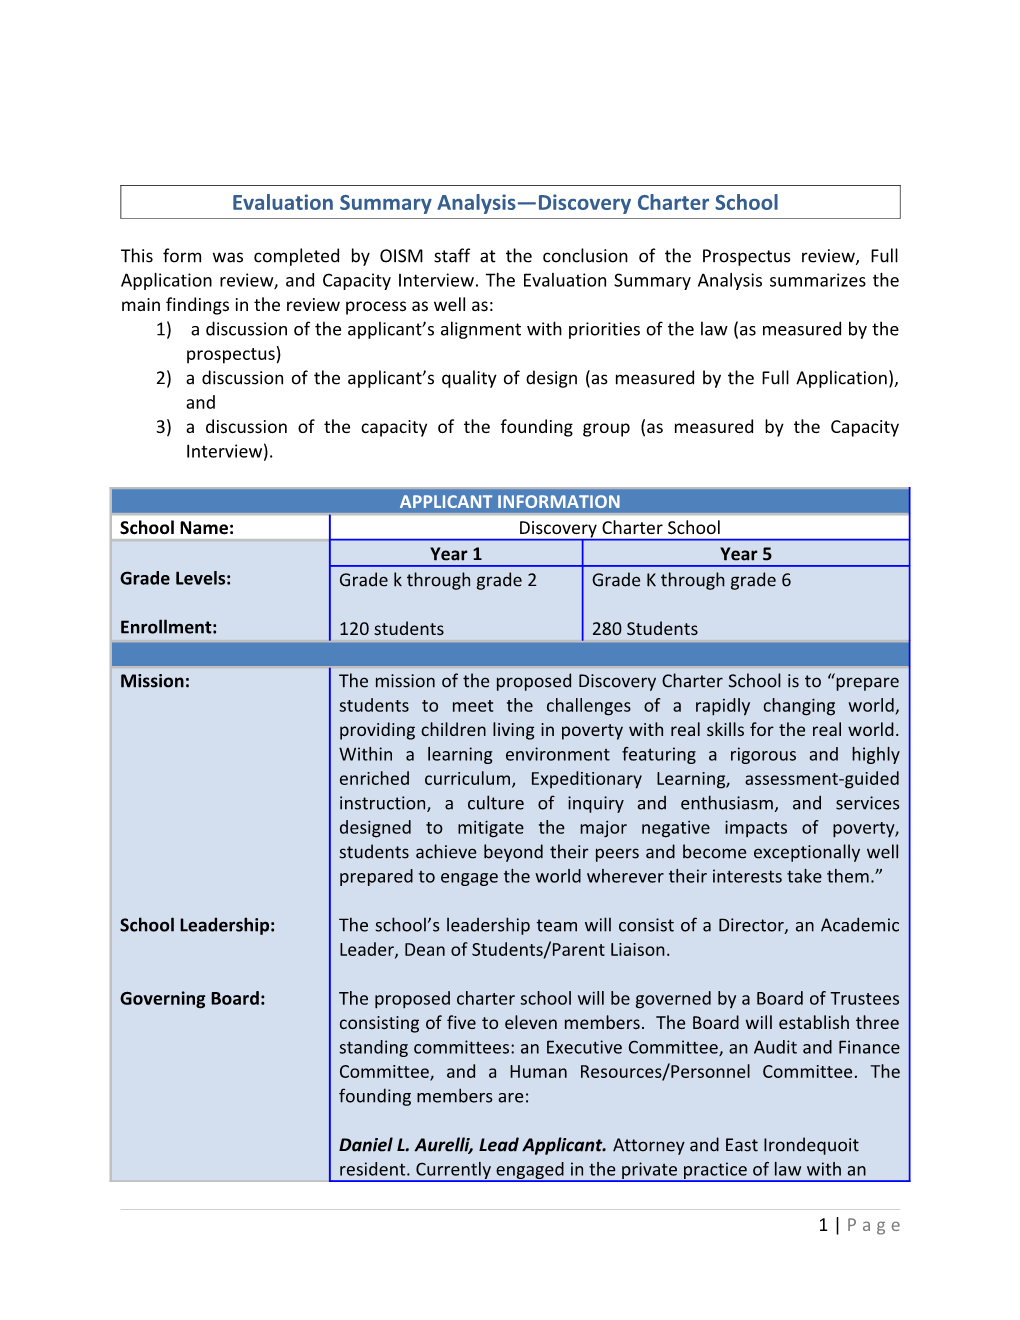 Review Form: Capacity Interview of the Proposed Discovery Charter School